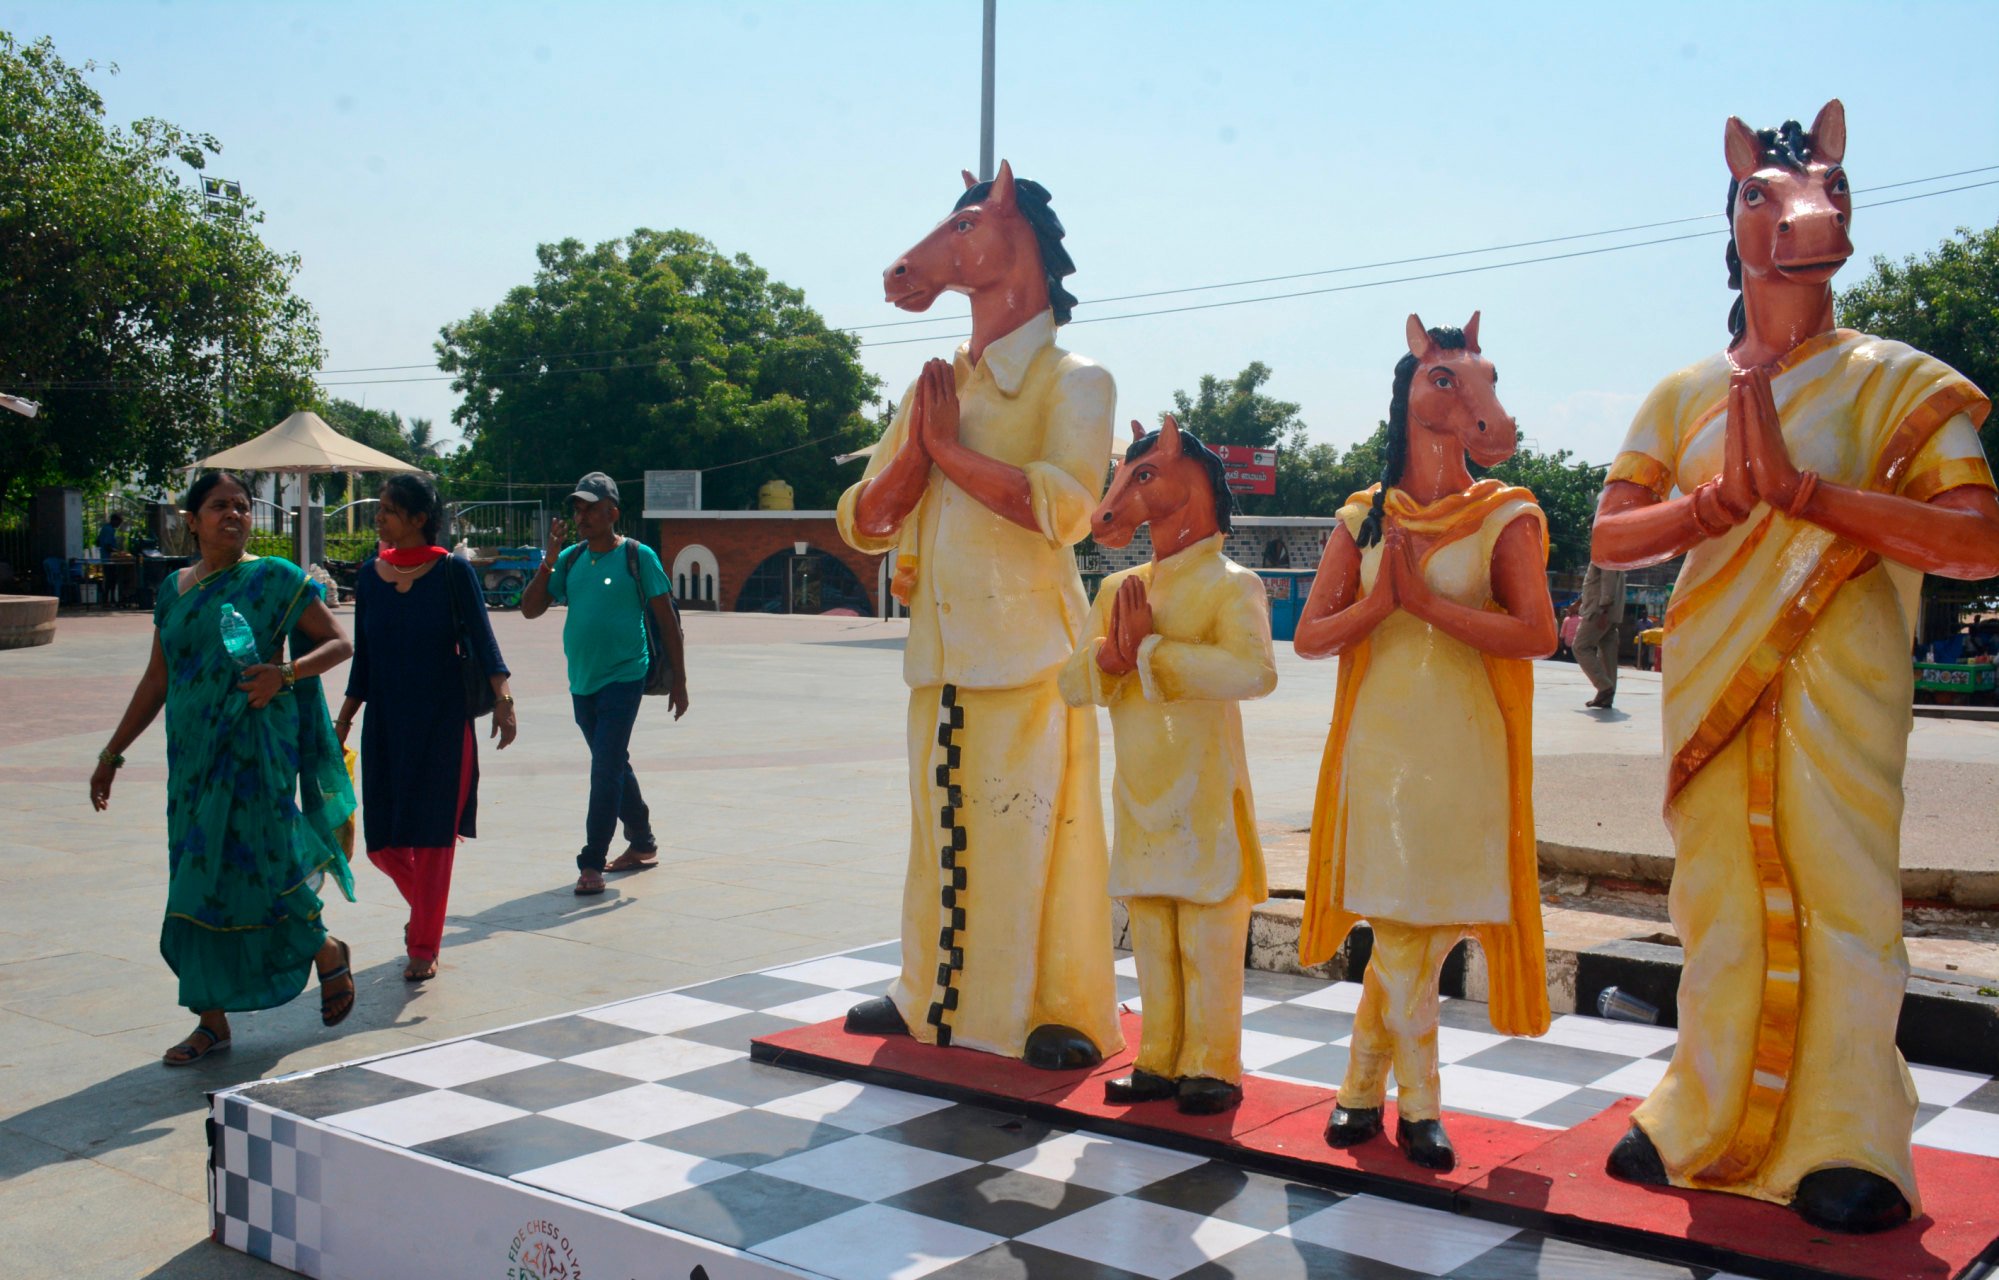 The 44th Chess Olympiad in Chennai, India started today